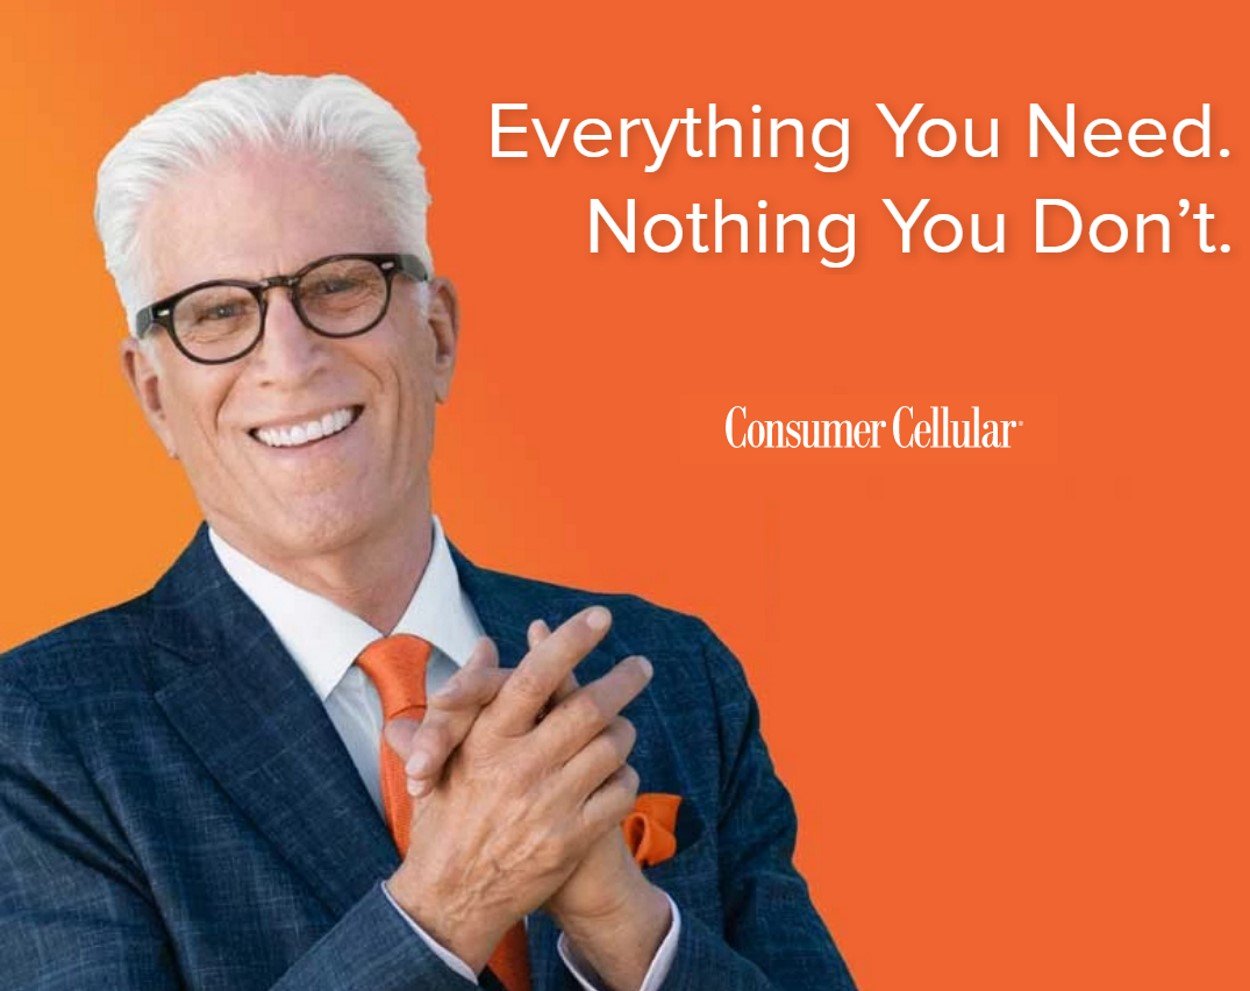 Consumer Cellular With Celebrity Spokesperson Ted Danson Pictured